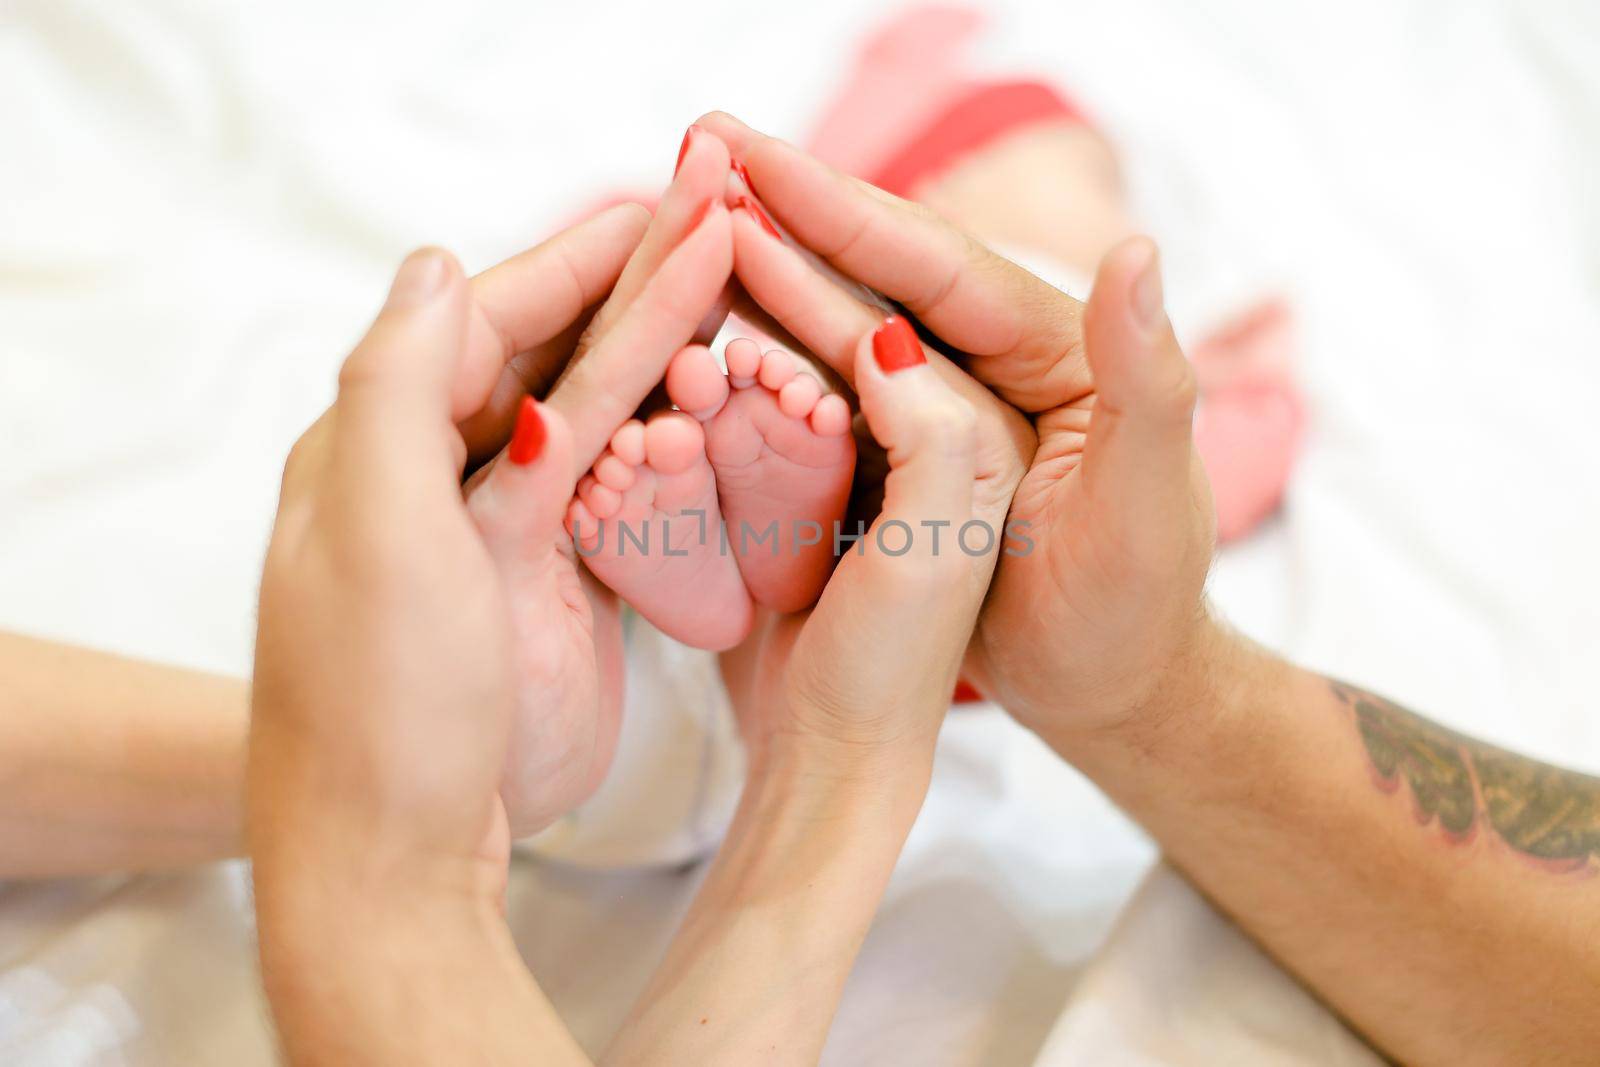 Mother and father hands holding newborns baby legs in white background. Concept of happy family and babes.